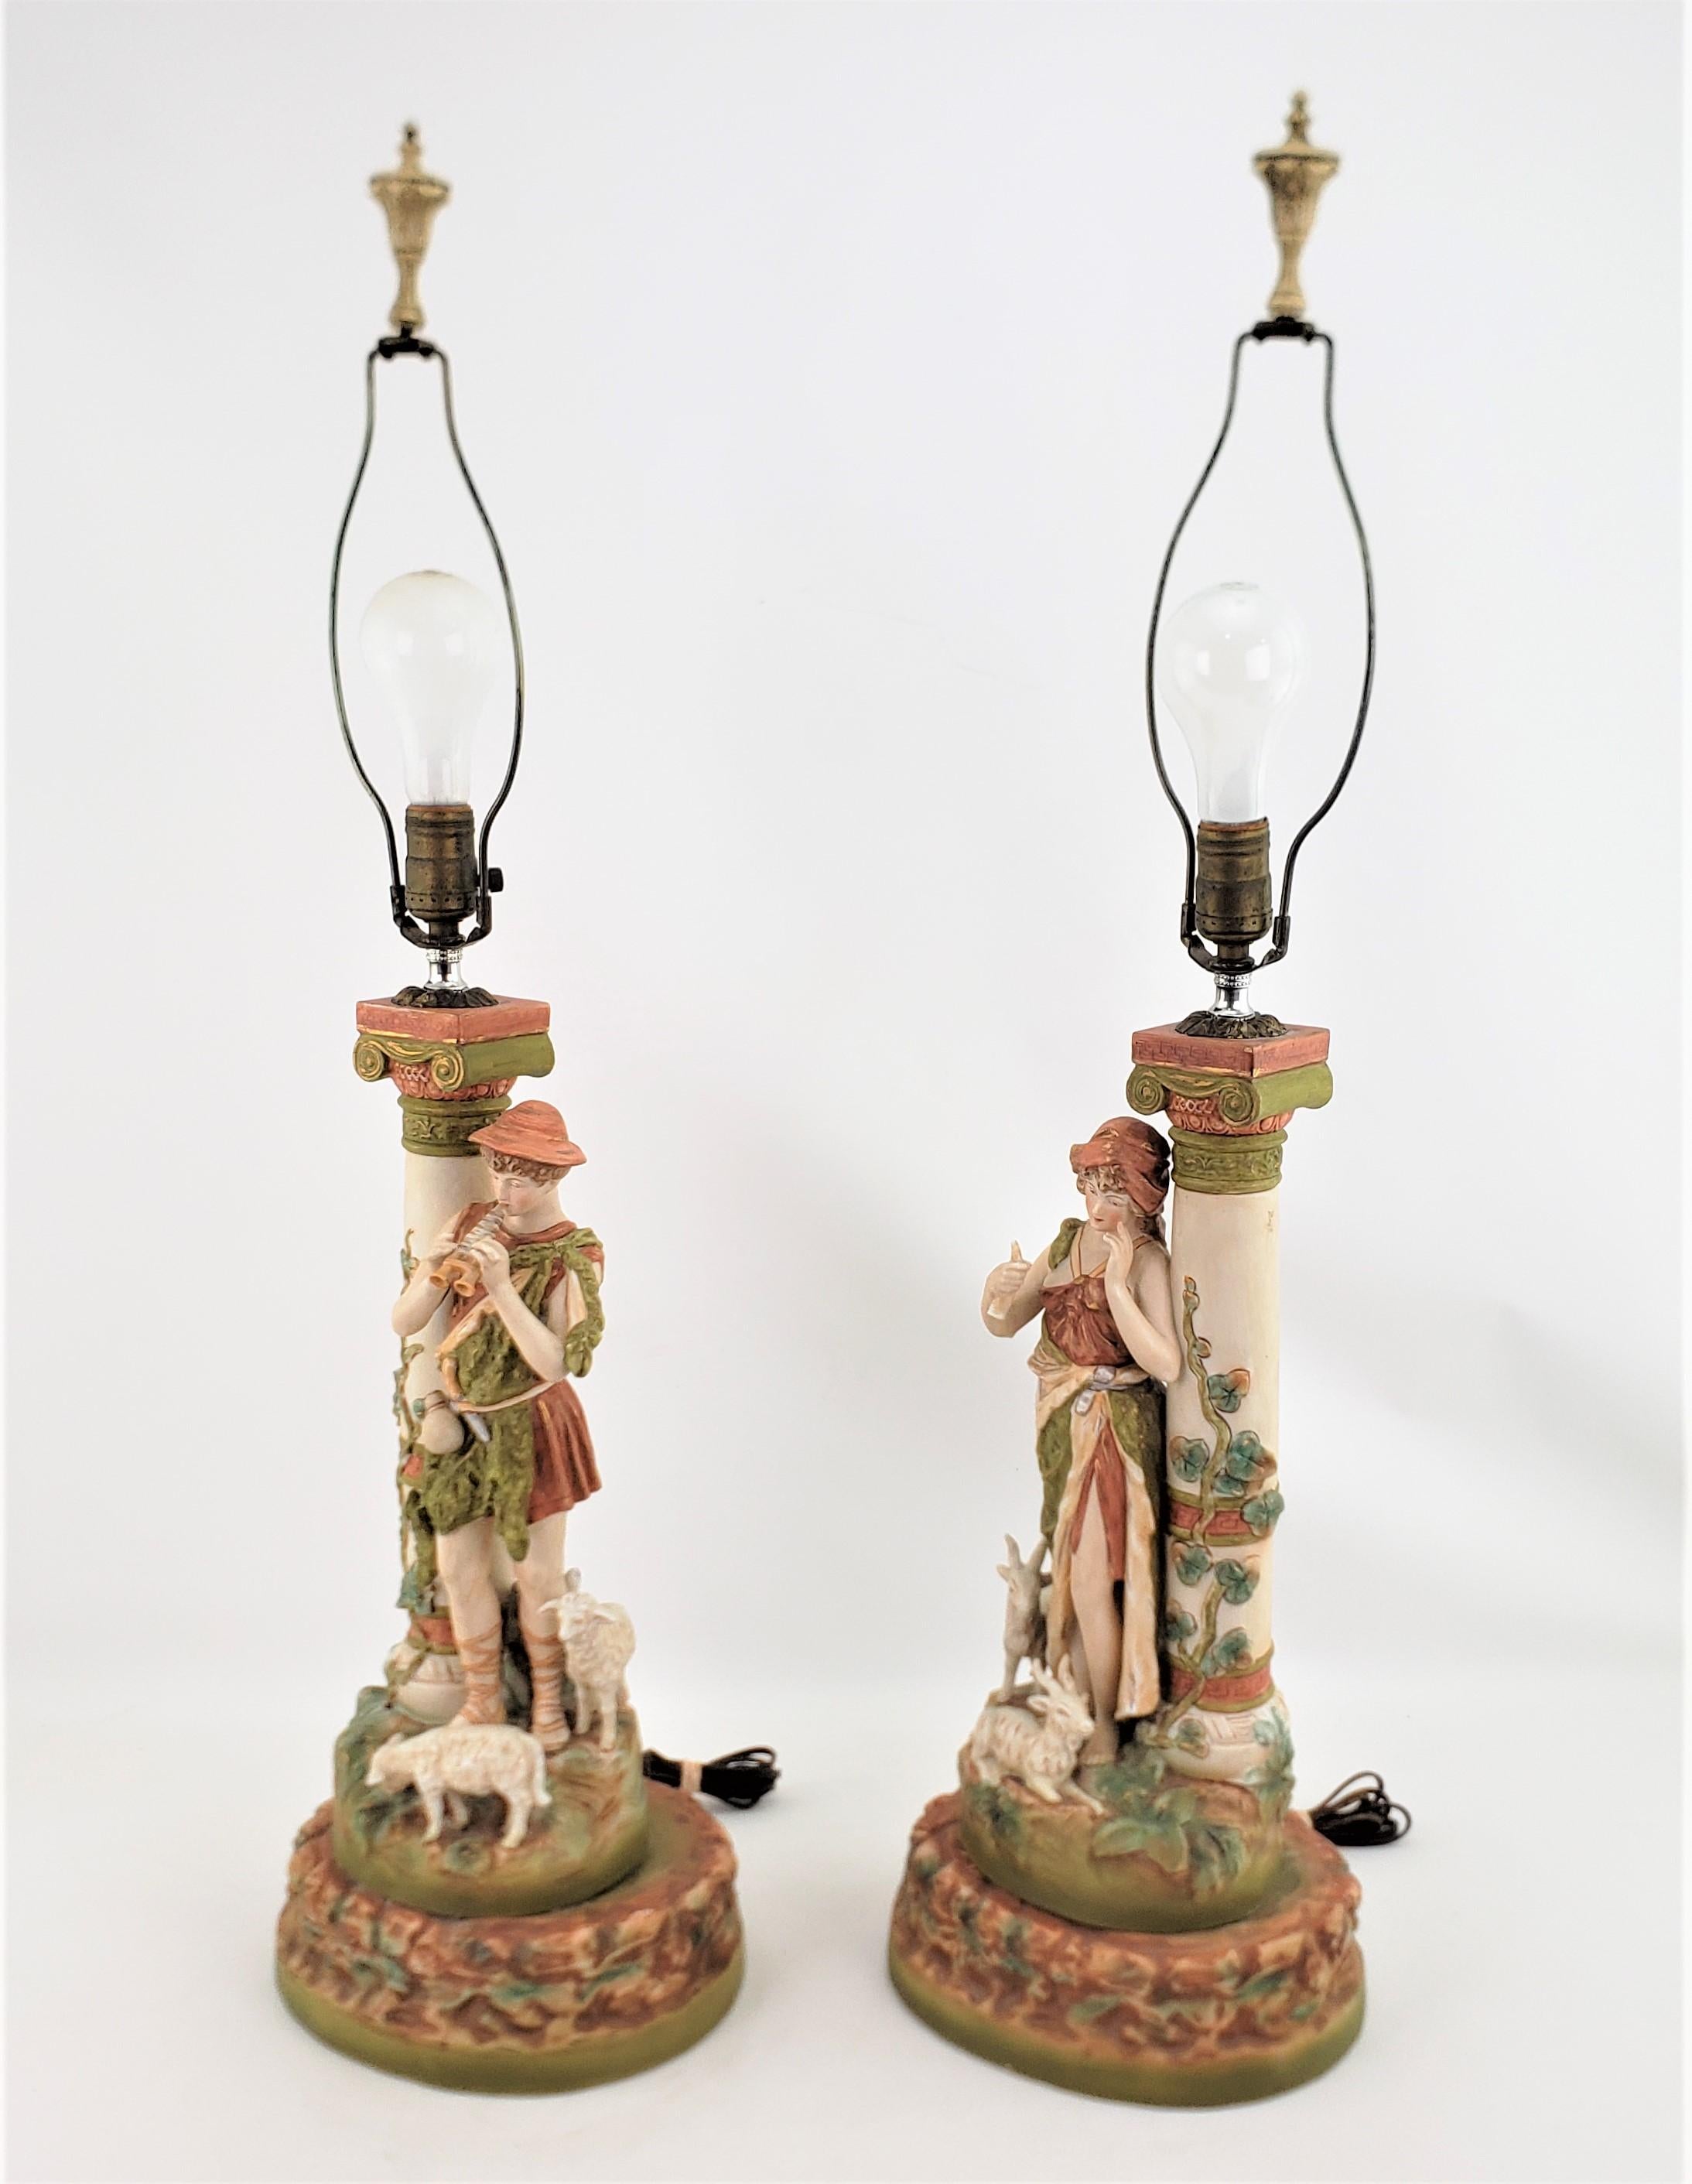 Porcelain Pair of Large Antique Royal Dux Attributed Table Lamps with Neoclassical Figures For Sale